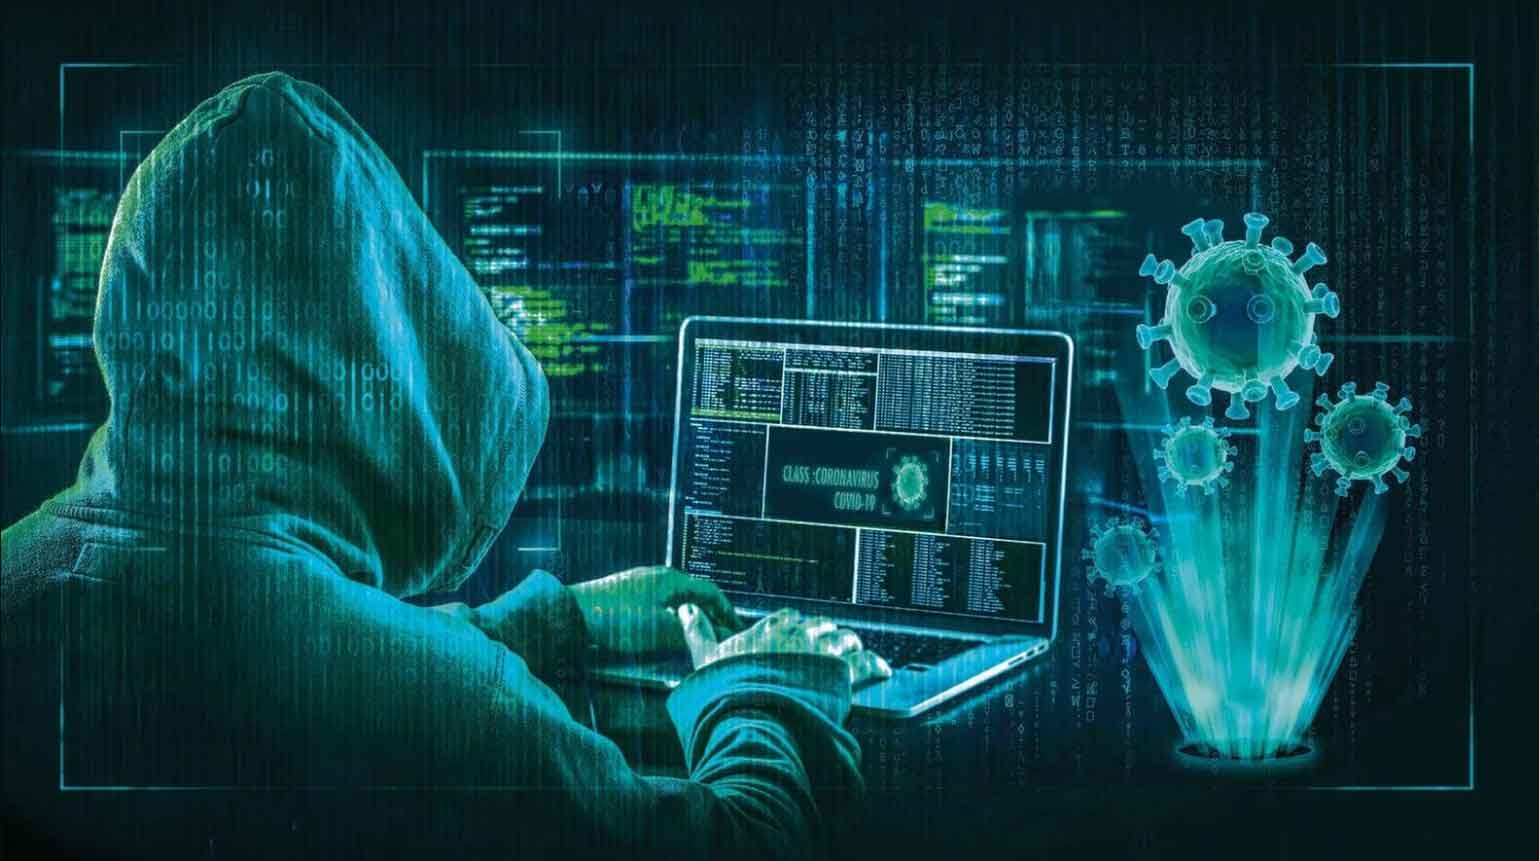 Average Indian firm hit by 2,152 cyber-attacks, 20% up YoY